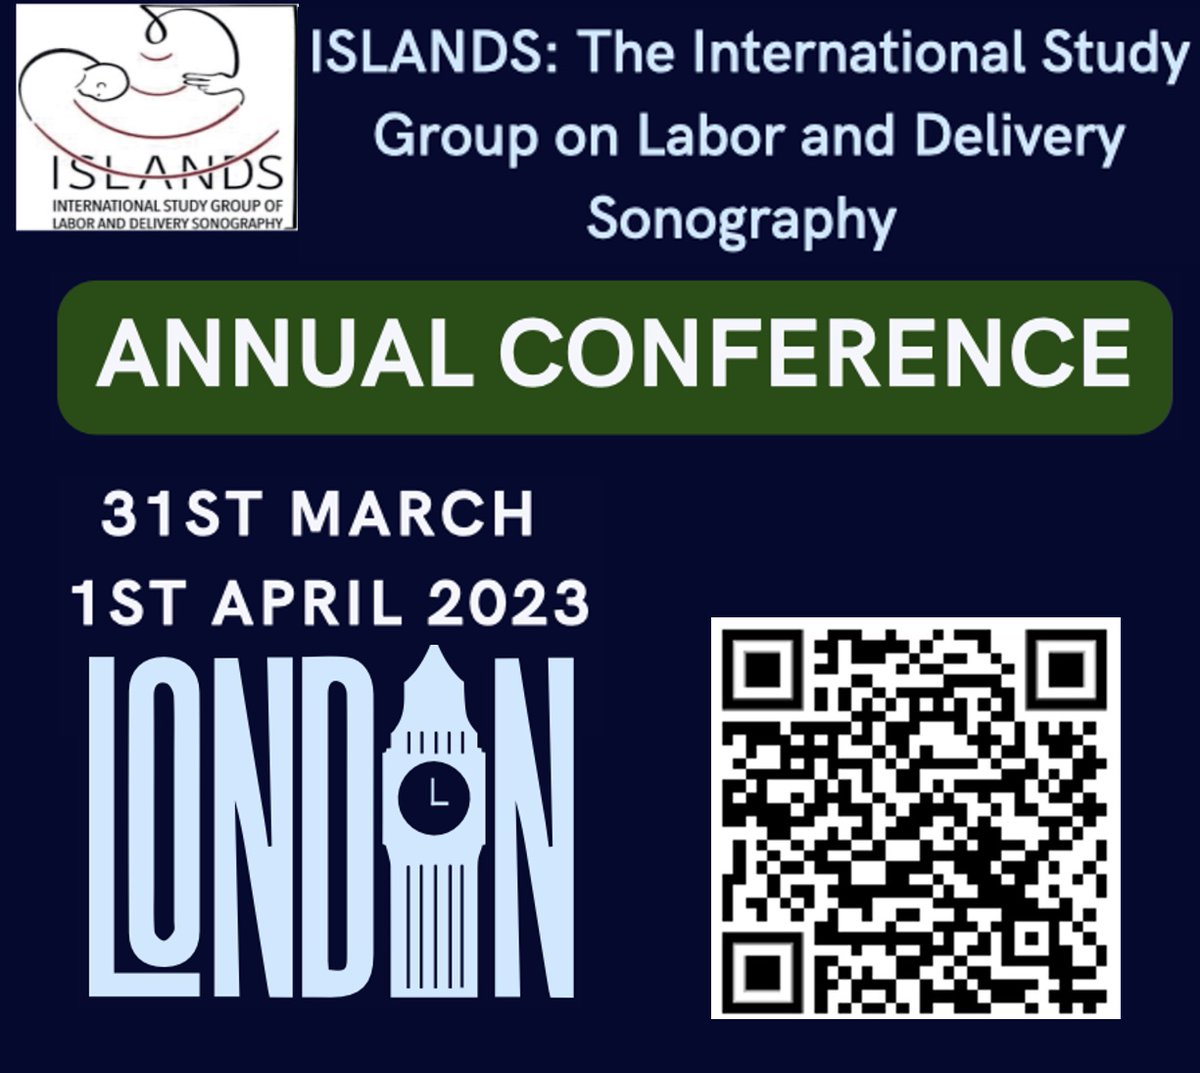 Meet us in #London at the annual ISLANDS conference! 31st March & 1st April 2023 Find out more bout this great event here: islands-group.com #LaborSonography #IntrapartumUltrasound #ISLANDS_London_2023 #astraiasoftware #WomensHealth